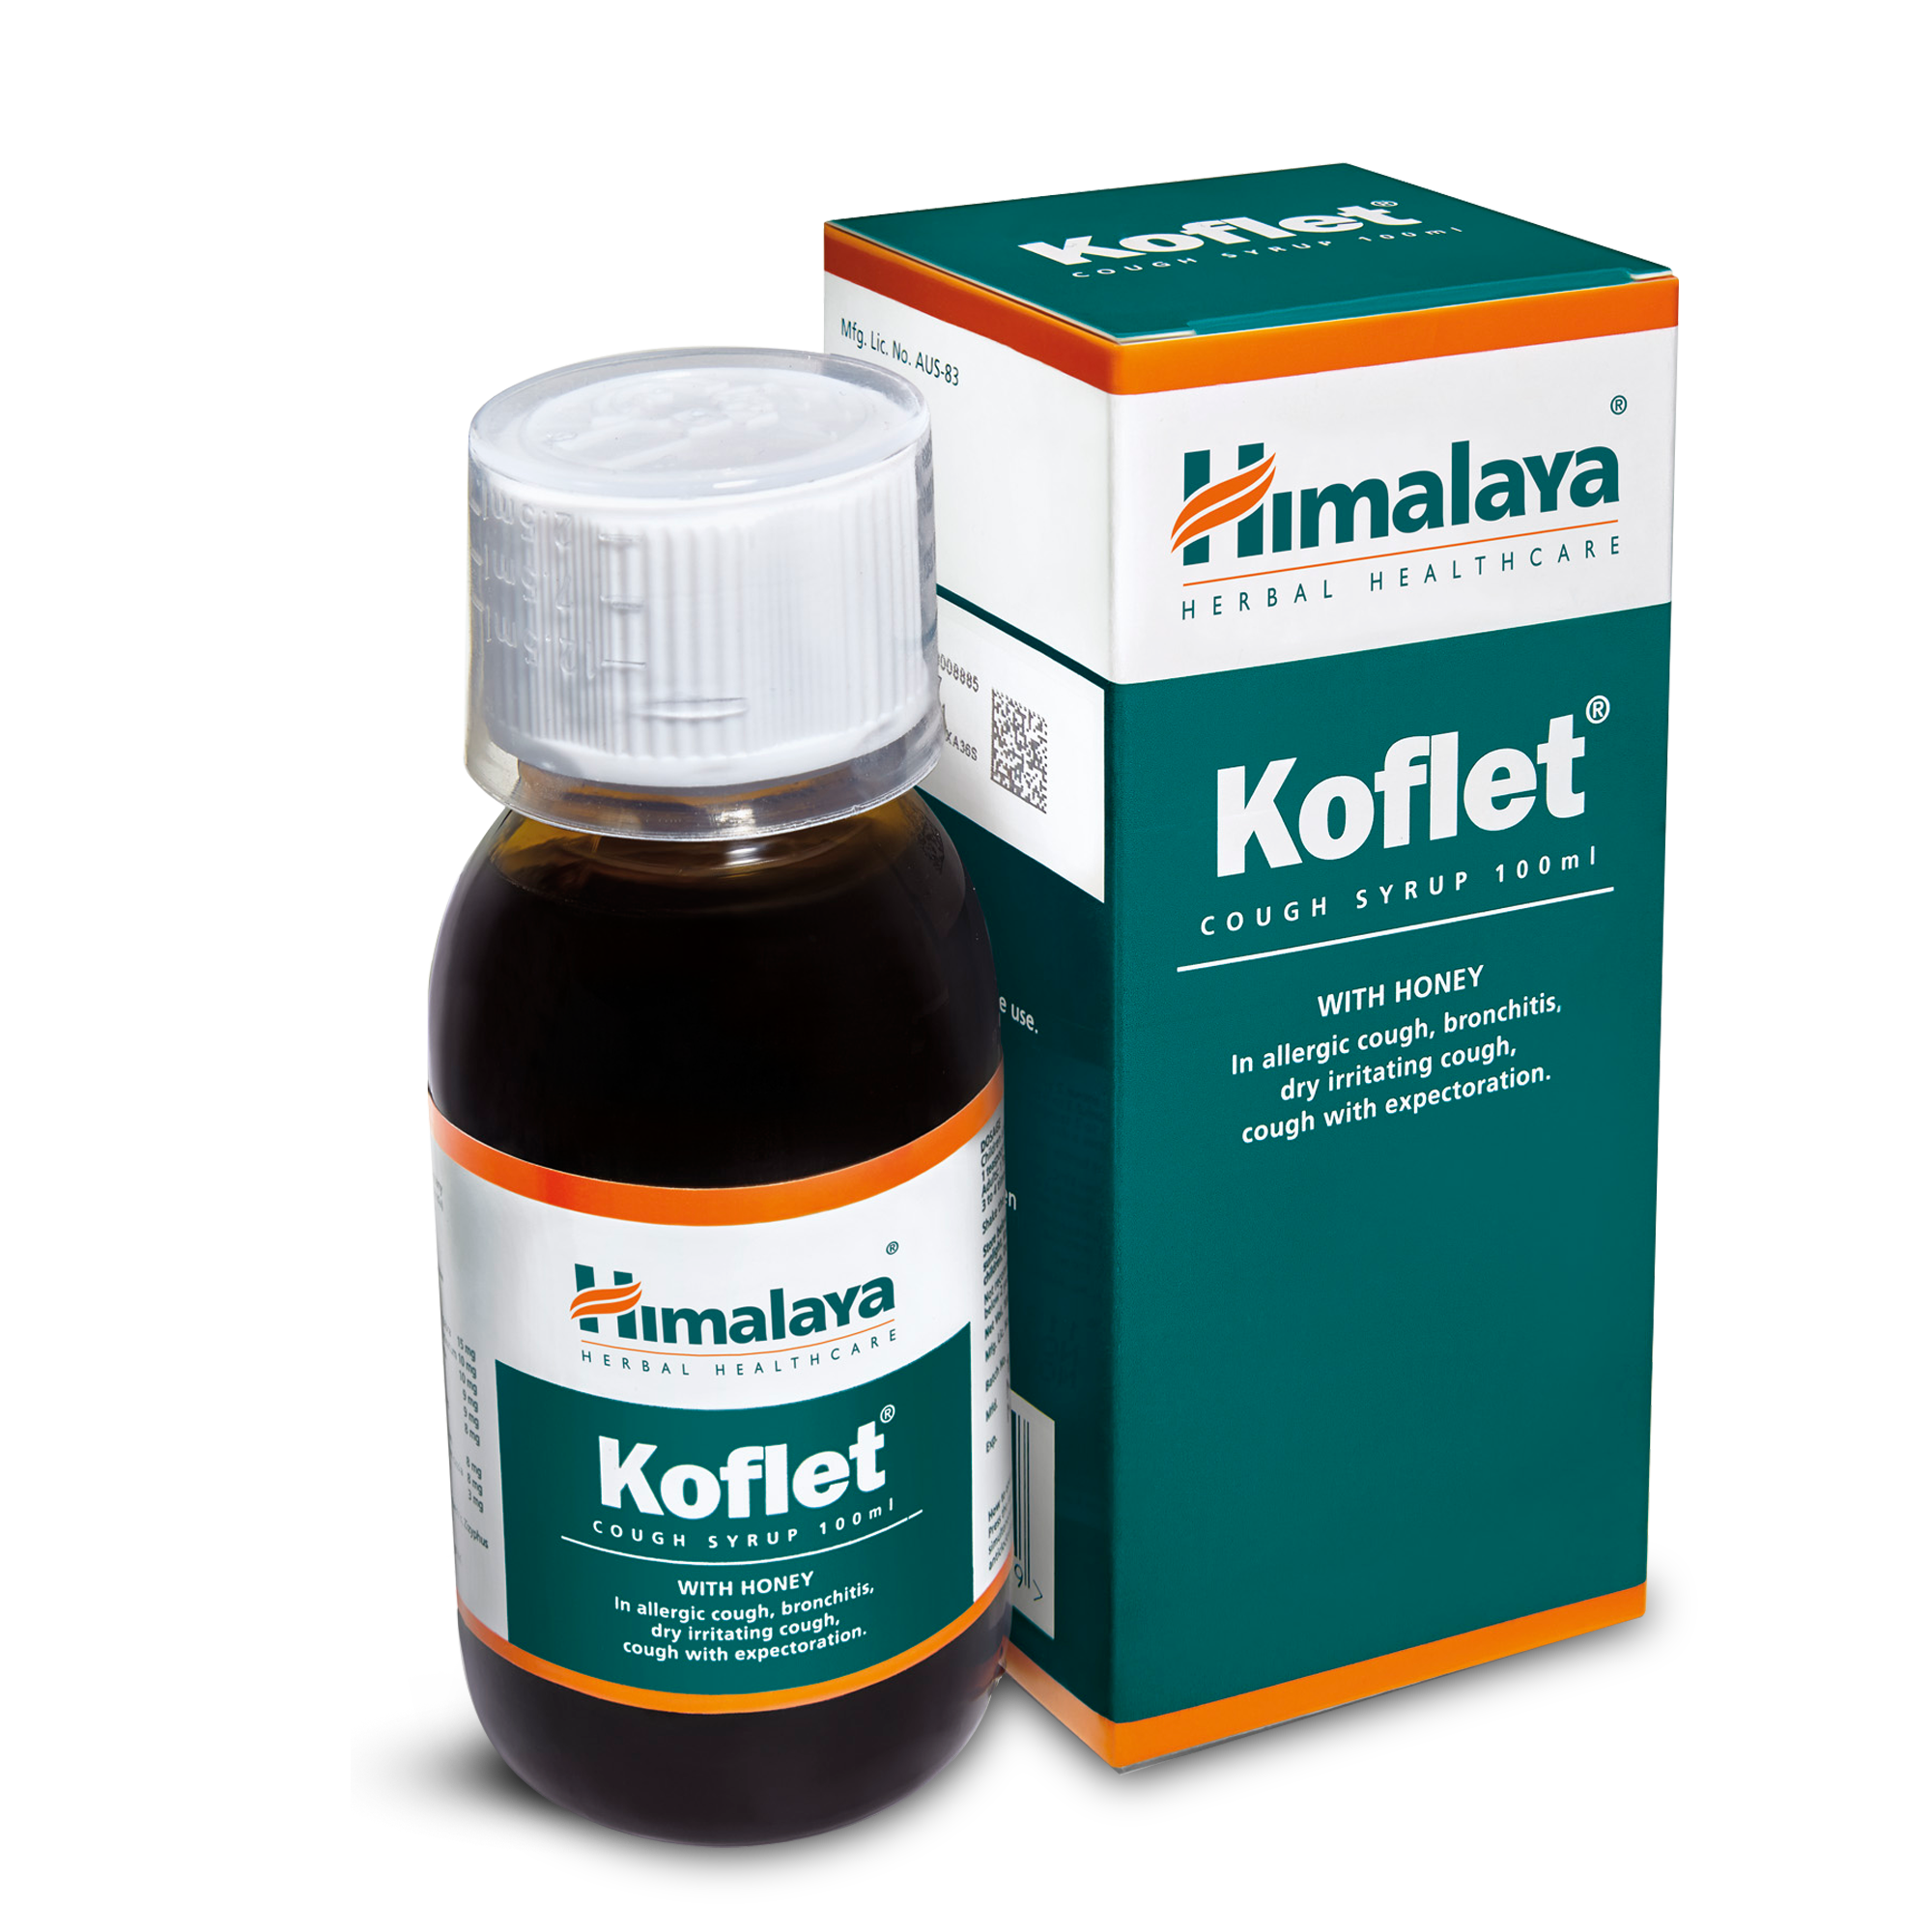 Himalaya Koflet Syrup 100ml - The Cough Reliever 